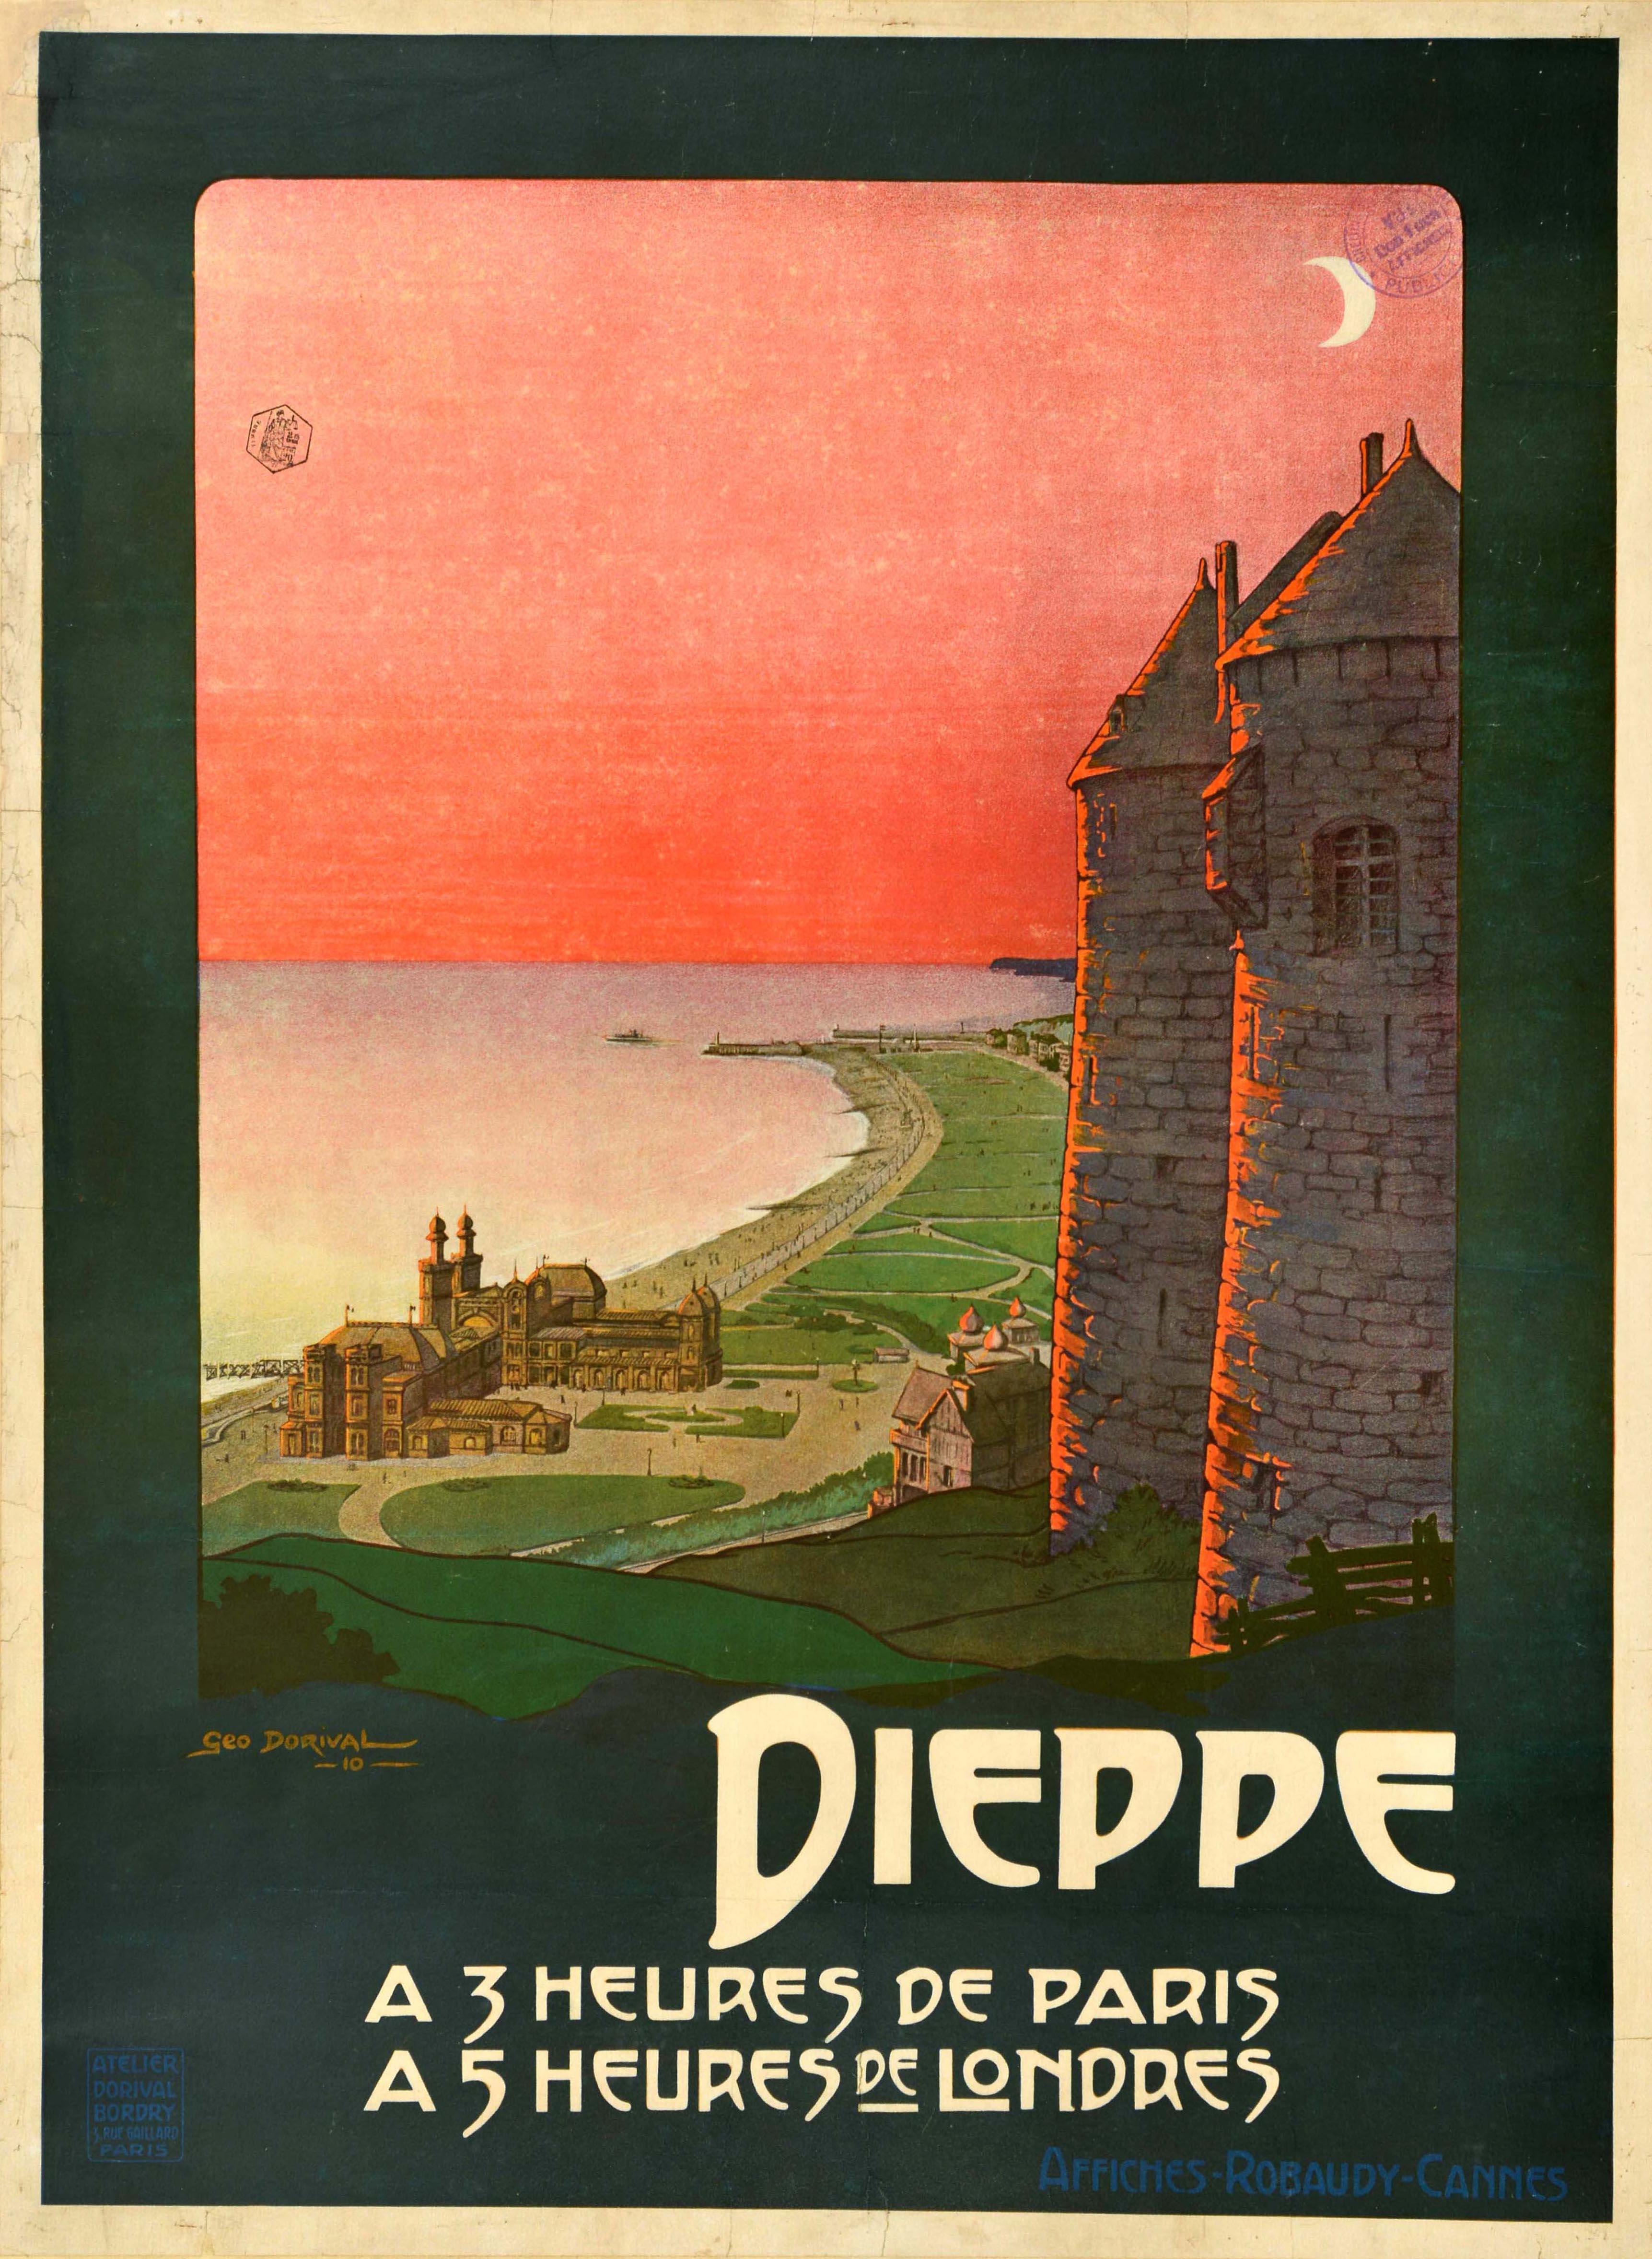 Original antique travel poster for Dieppe featuring a great design by Georges Dorival (1879-1968) depicting a panoramic view of the town with its park areas and beaches on the Normandy coast from the historic Chateau de Dieppe, the glow of the